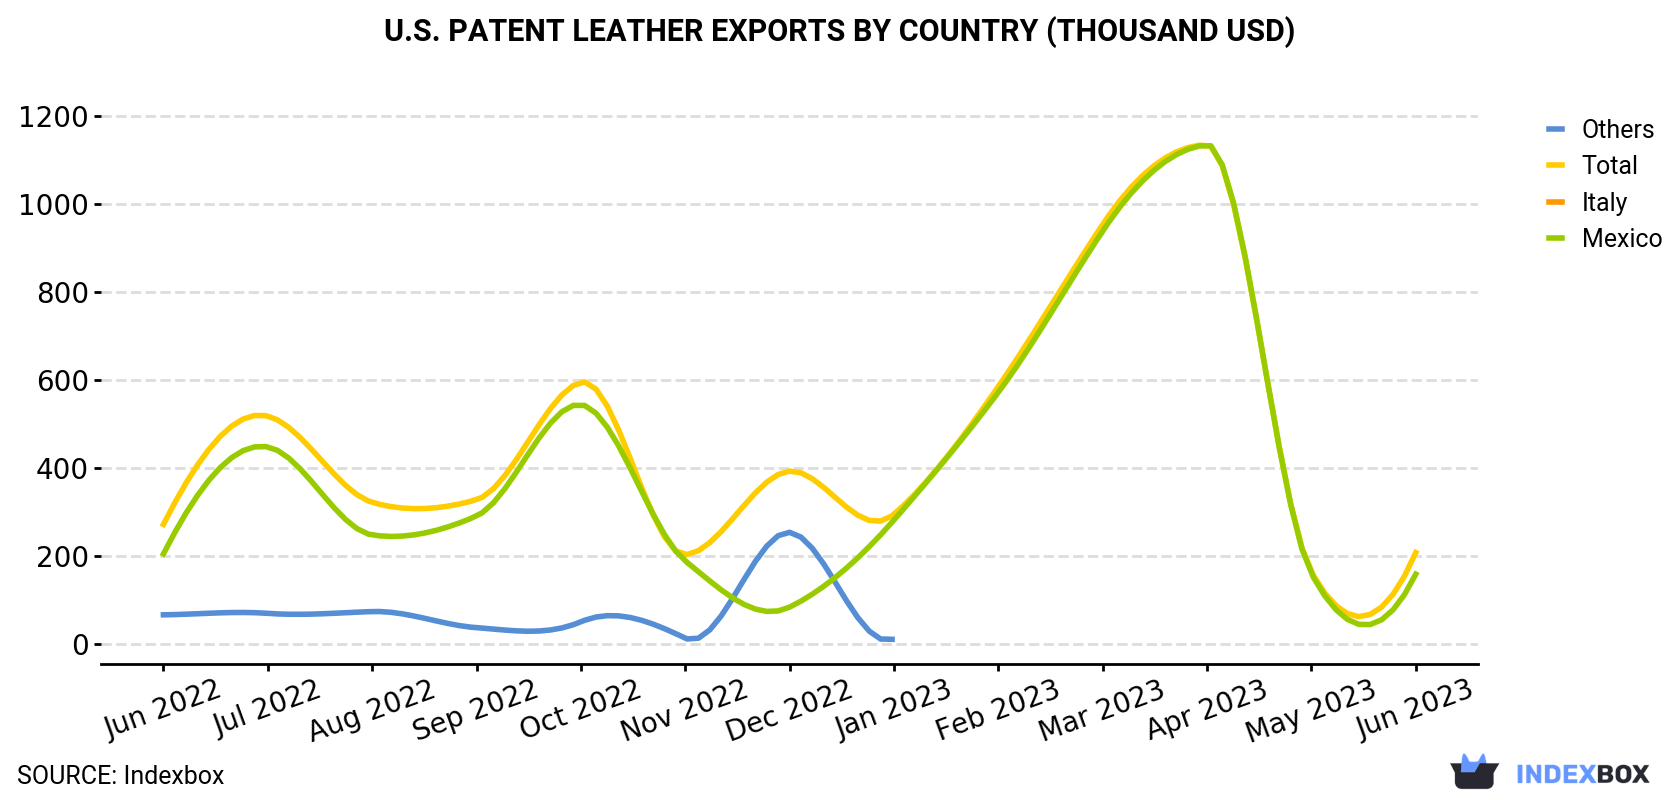 U.S. Patent Leather Exports By Country (Thousand USD)